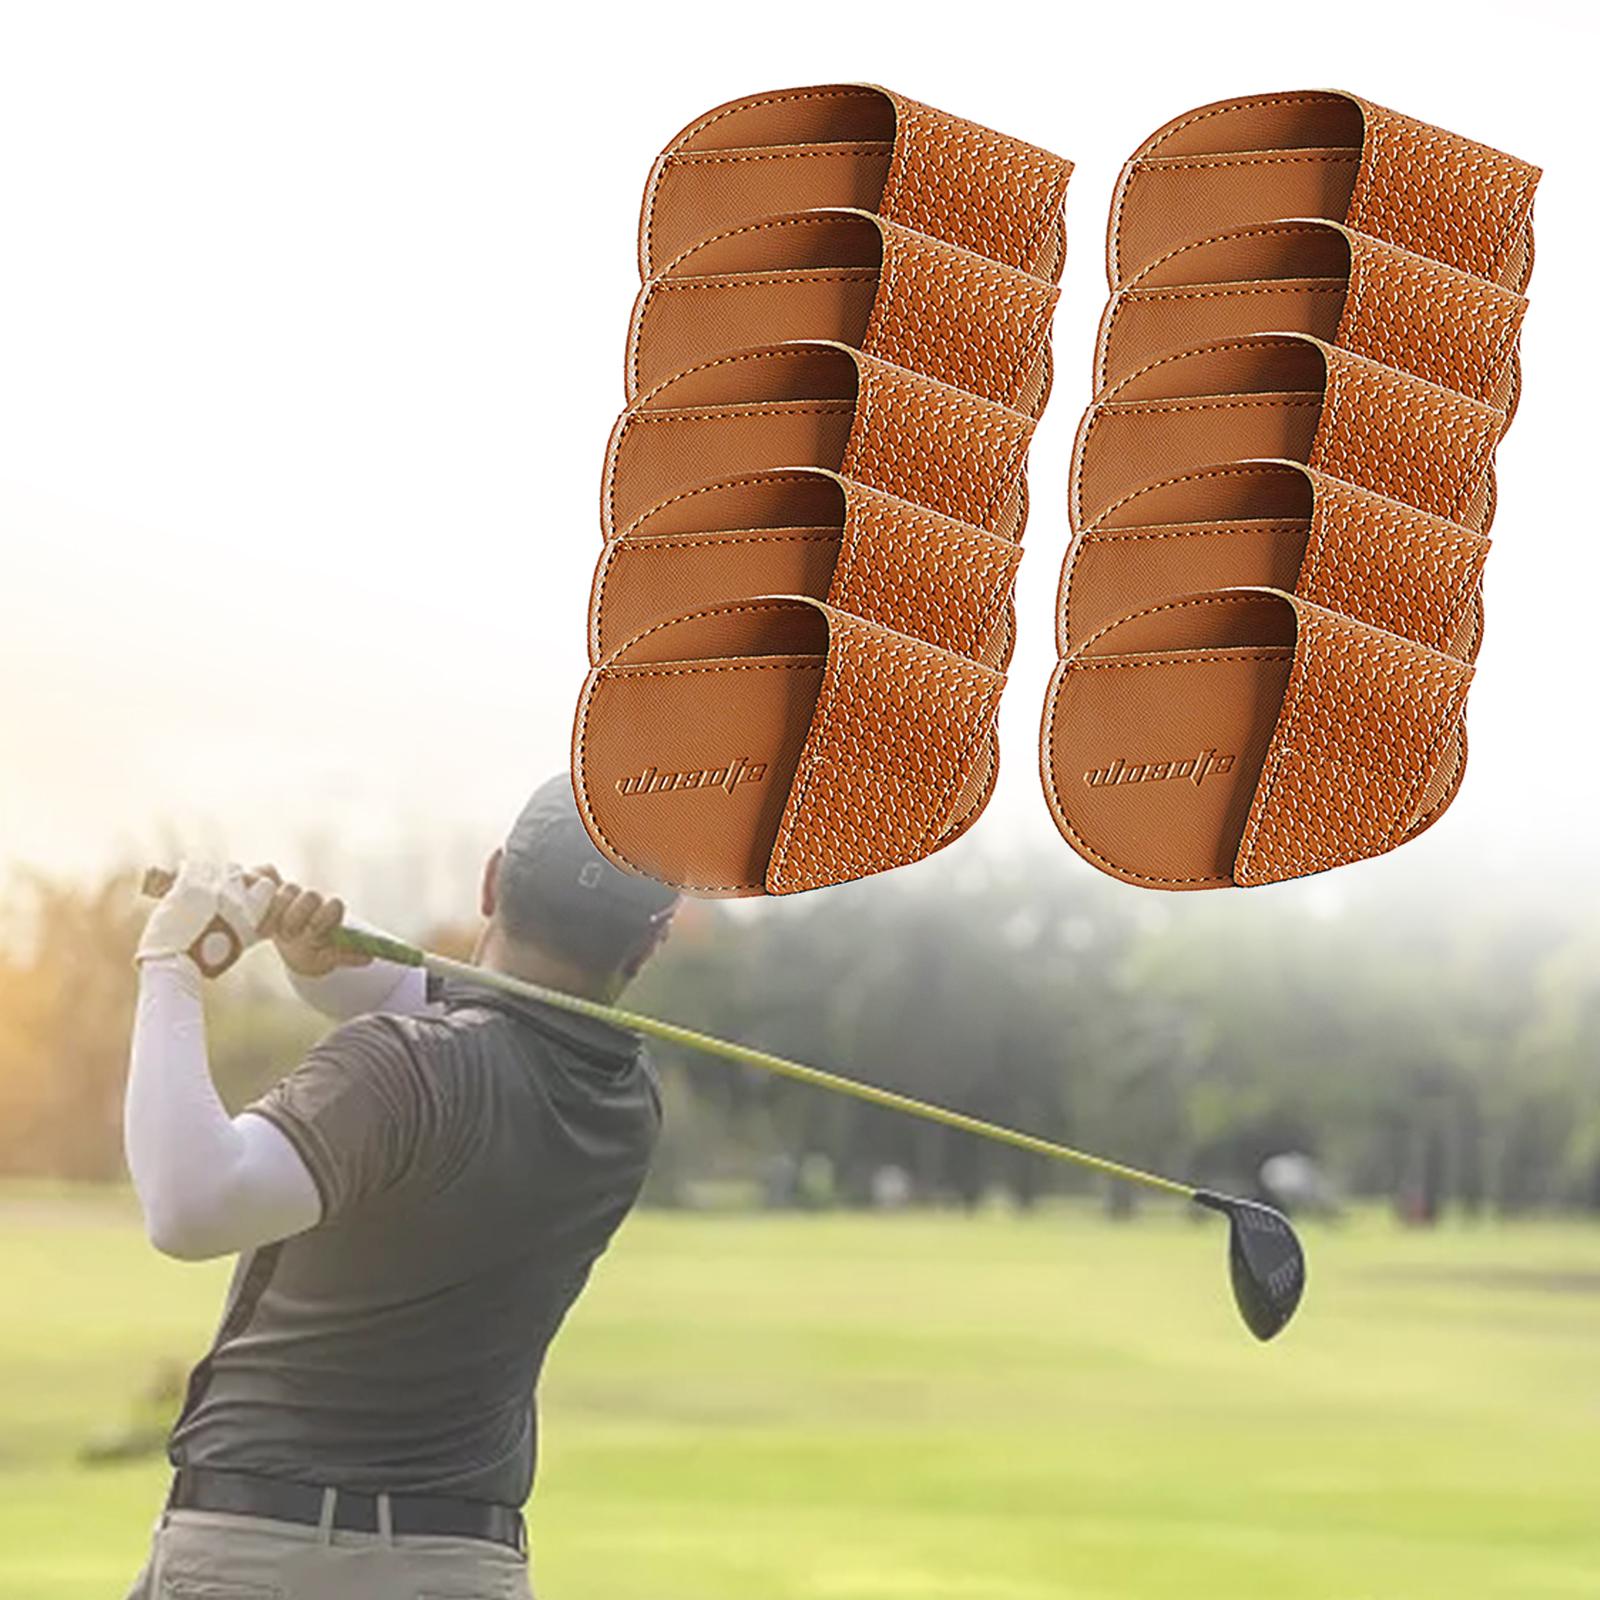 Golf Head Covers PU Portable Protector for Athlete Travel Golf Training Brown Large